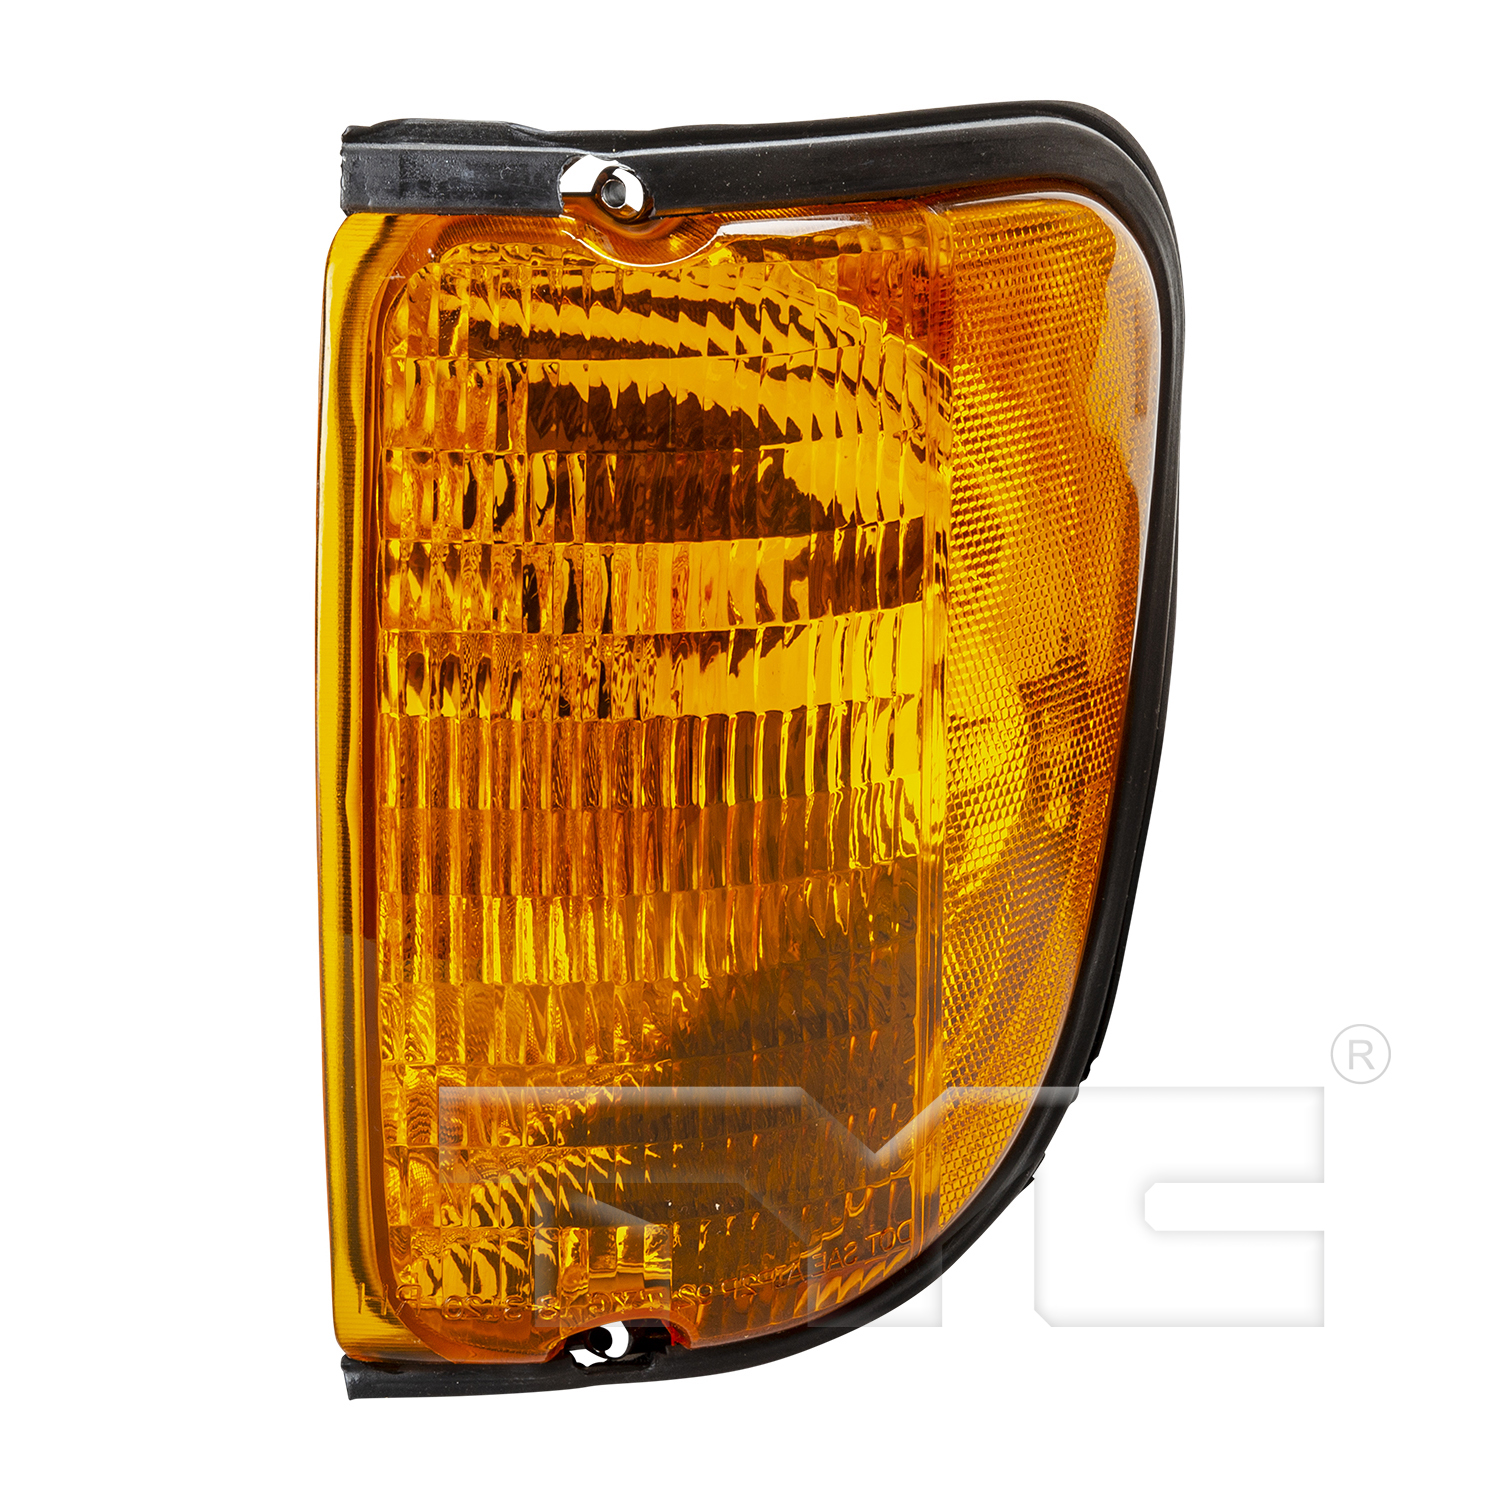 Aftermarket LAMPS for FORD - E-150 CLUB WAGON, E-150 CLUB WAGON,04-05,LT Parklamp assy